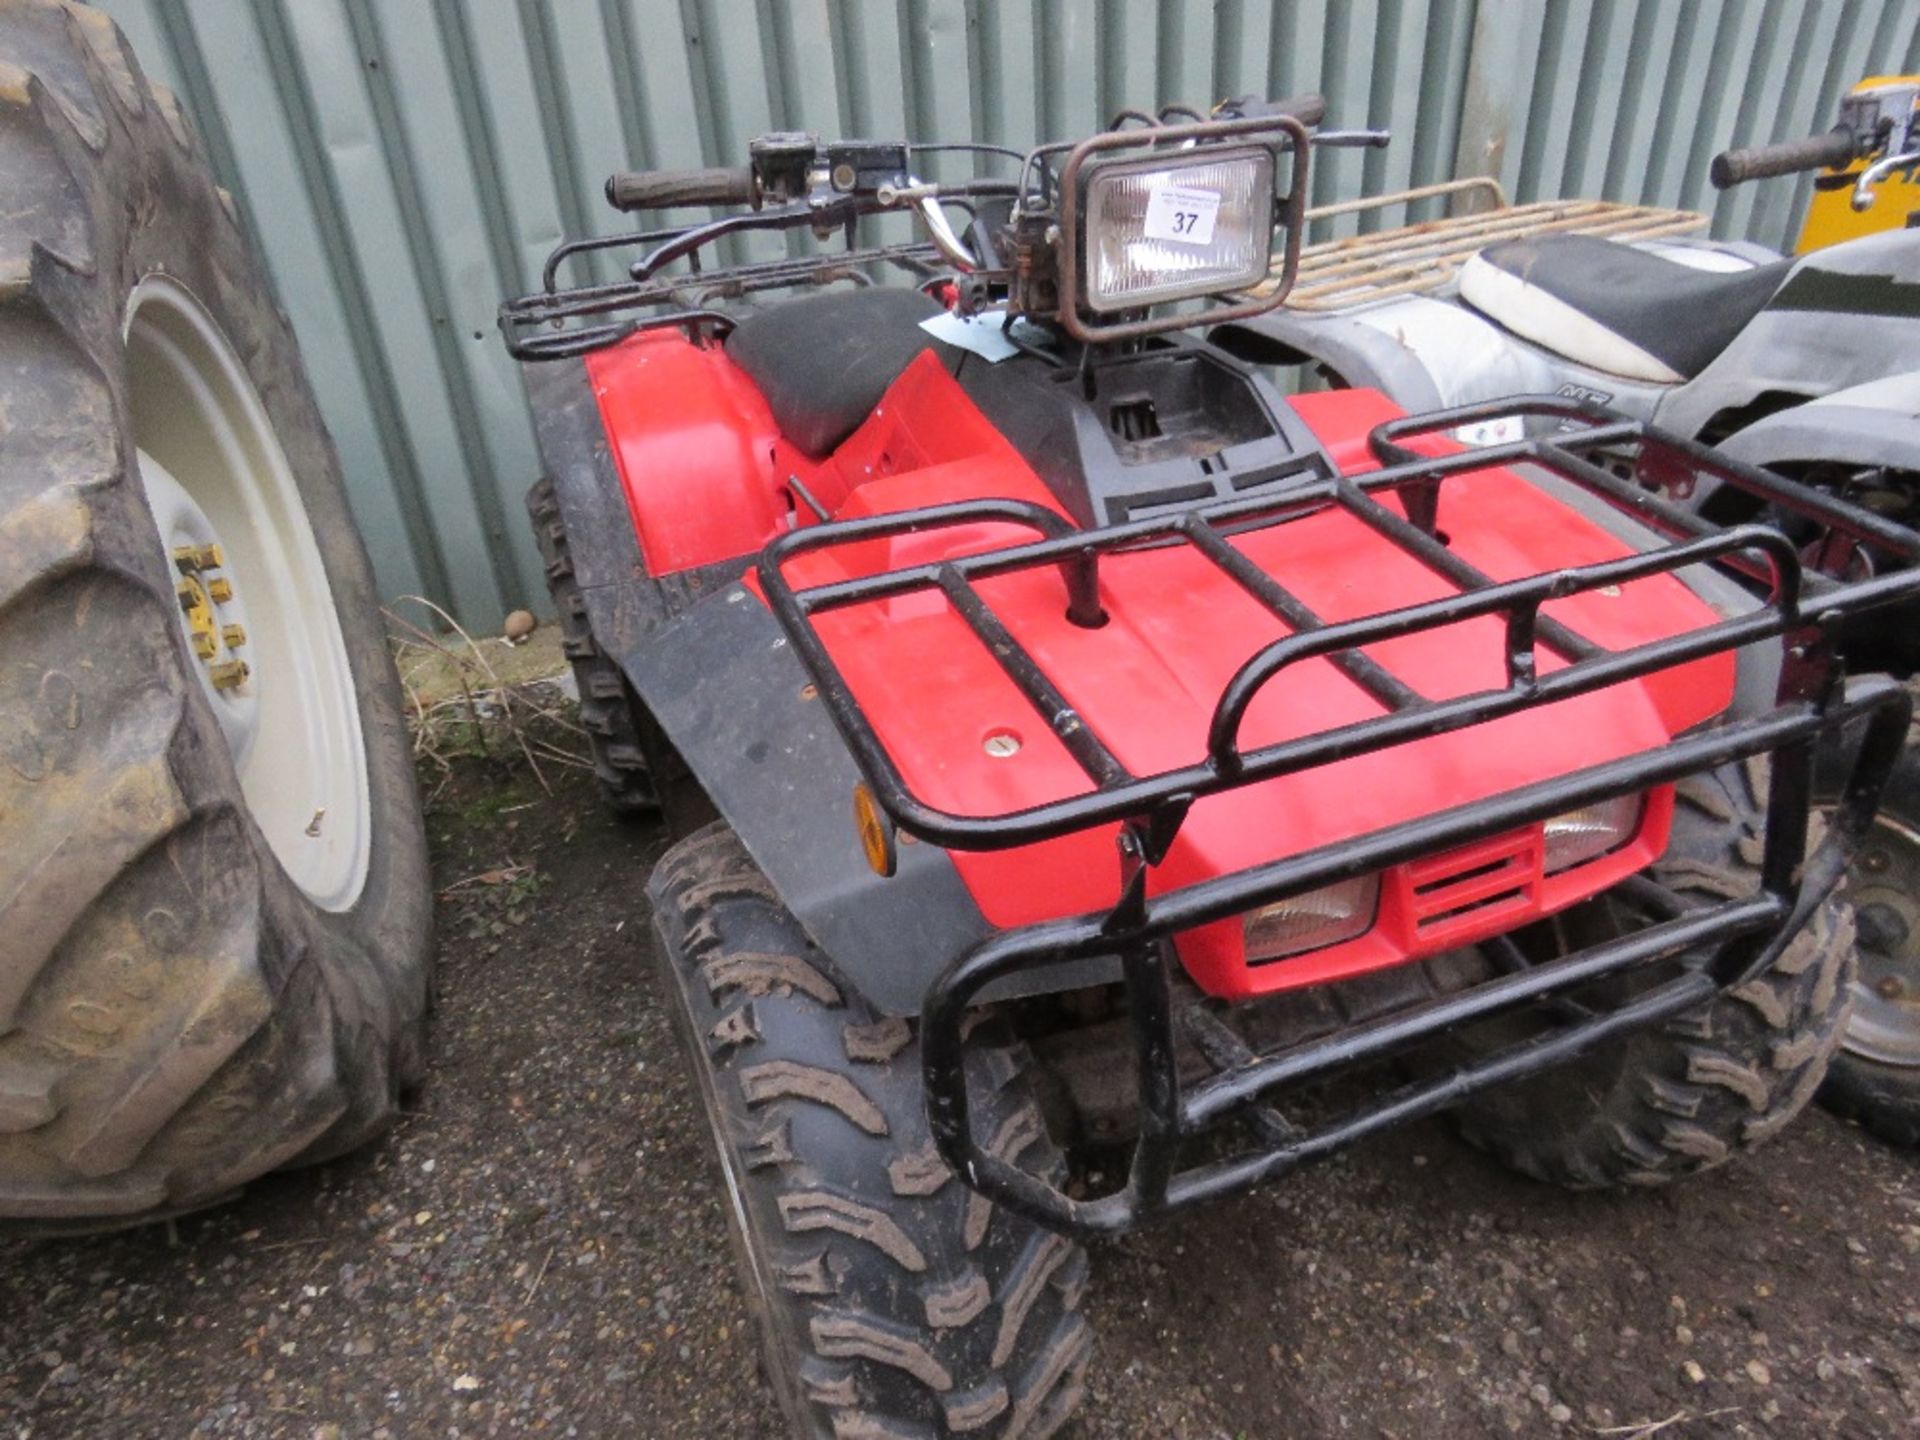 HONDA 2WD QUAD BIKE, RECENT TYRE REPLACEMENT. WHEN TESTED WAS SEEN TO START, DRIVE AND STEER, BRAKES